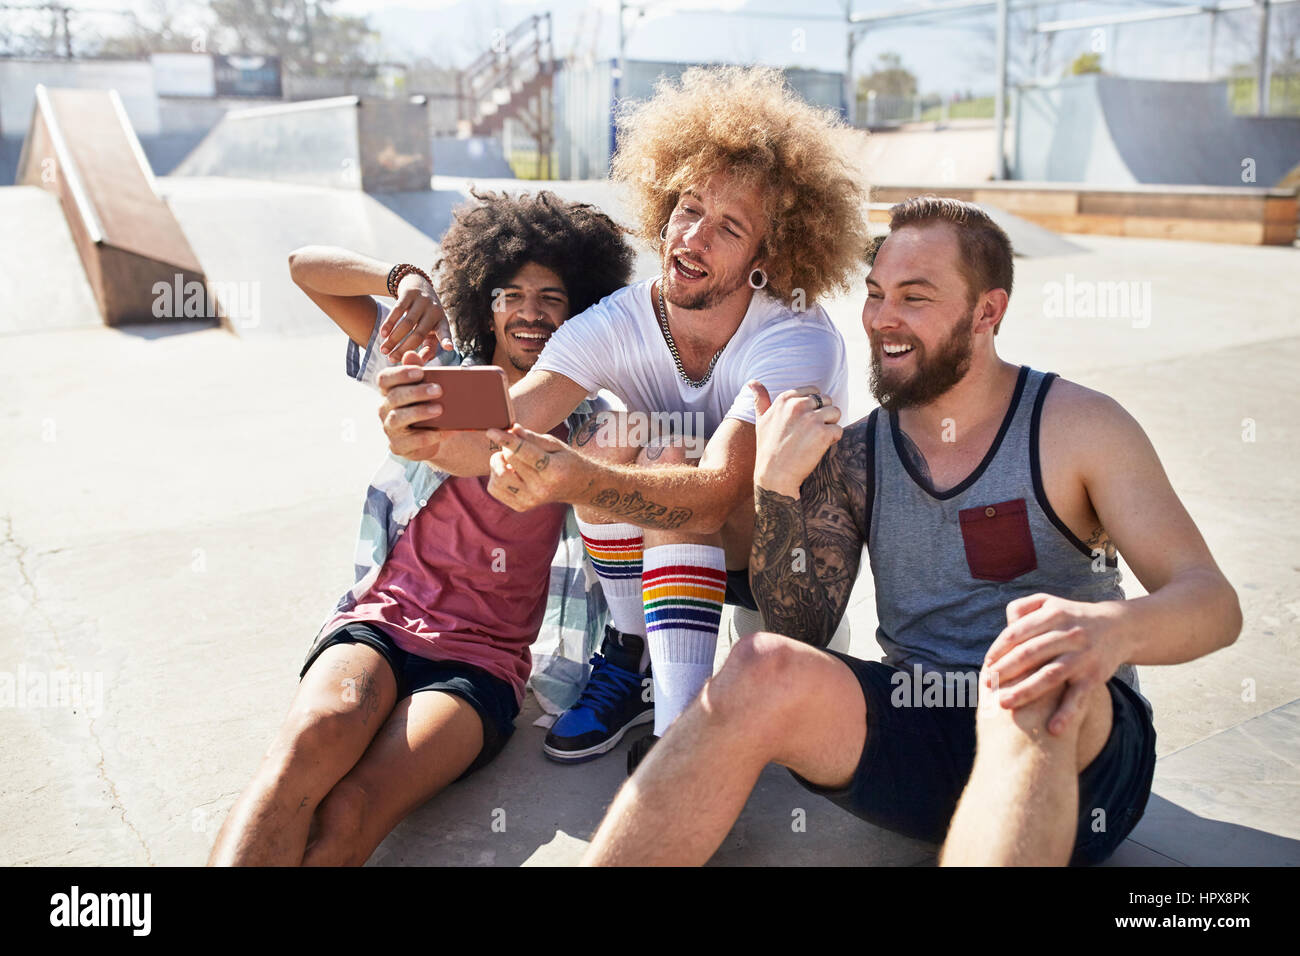 Male friends with camera phone taking selfie at sunny skate park Stock Photo